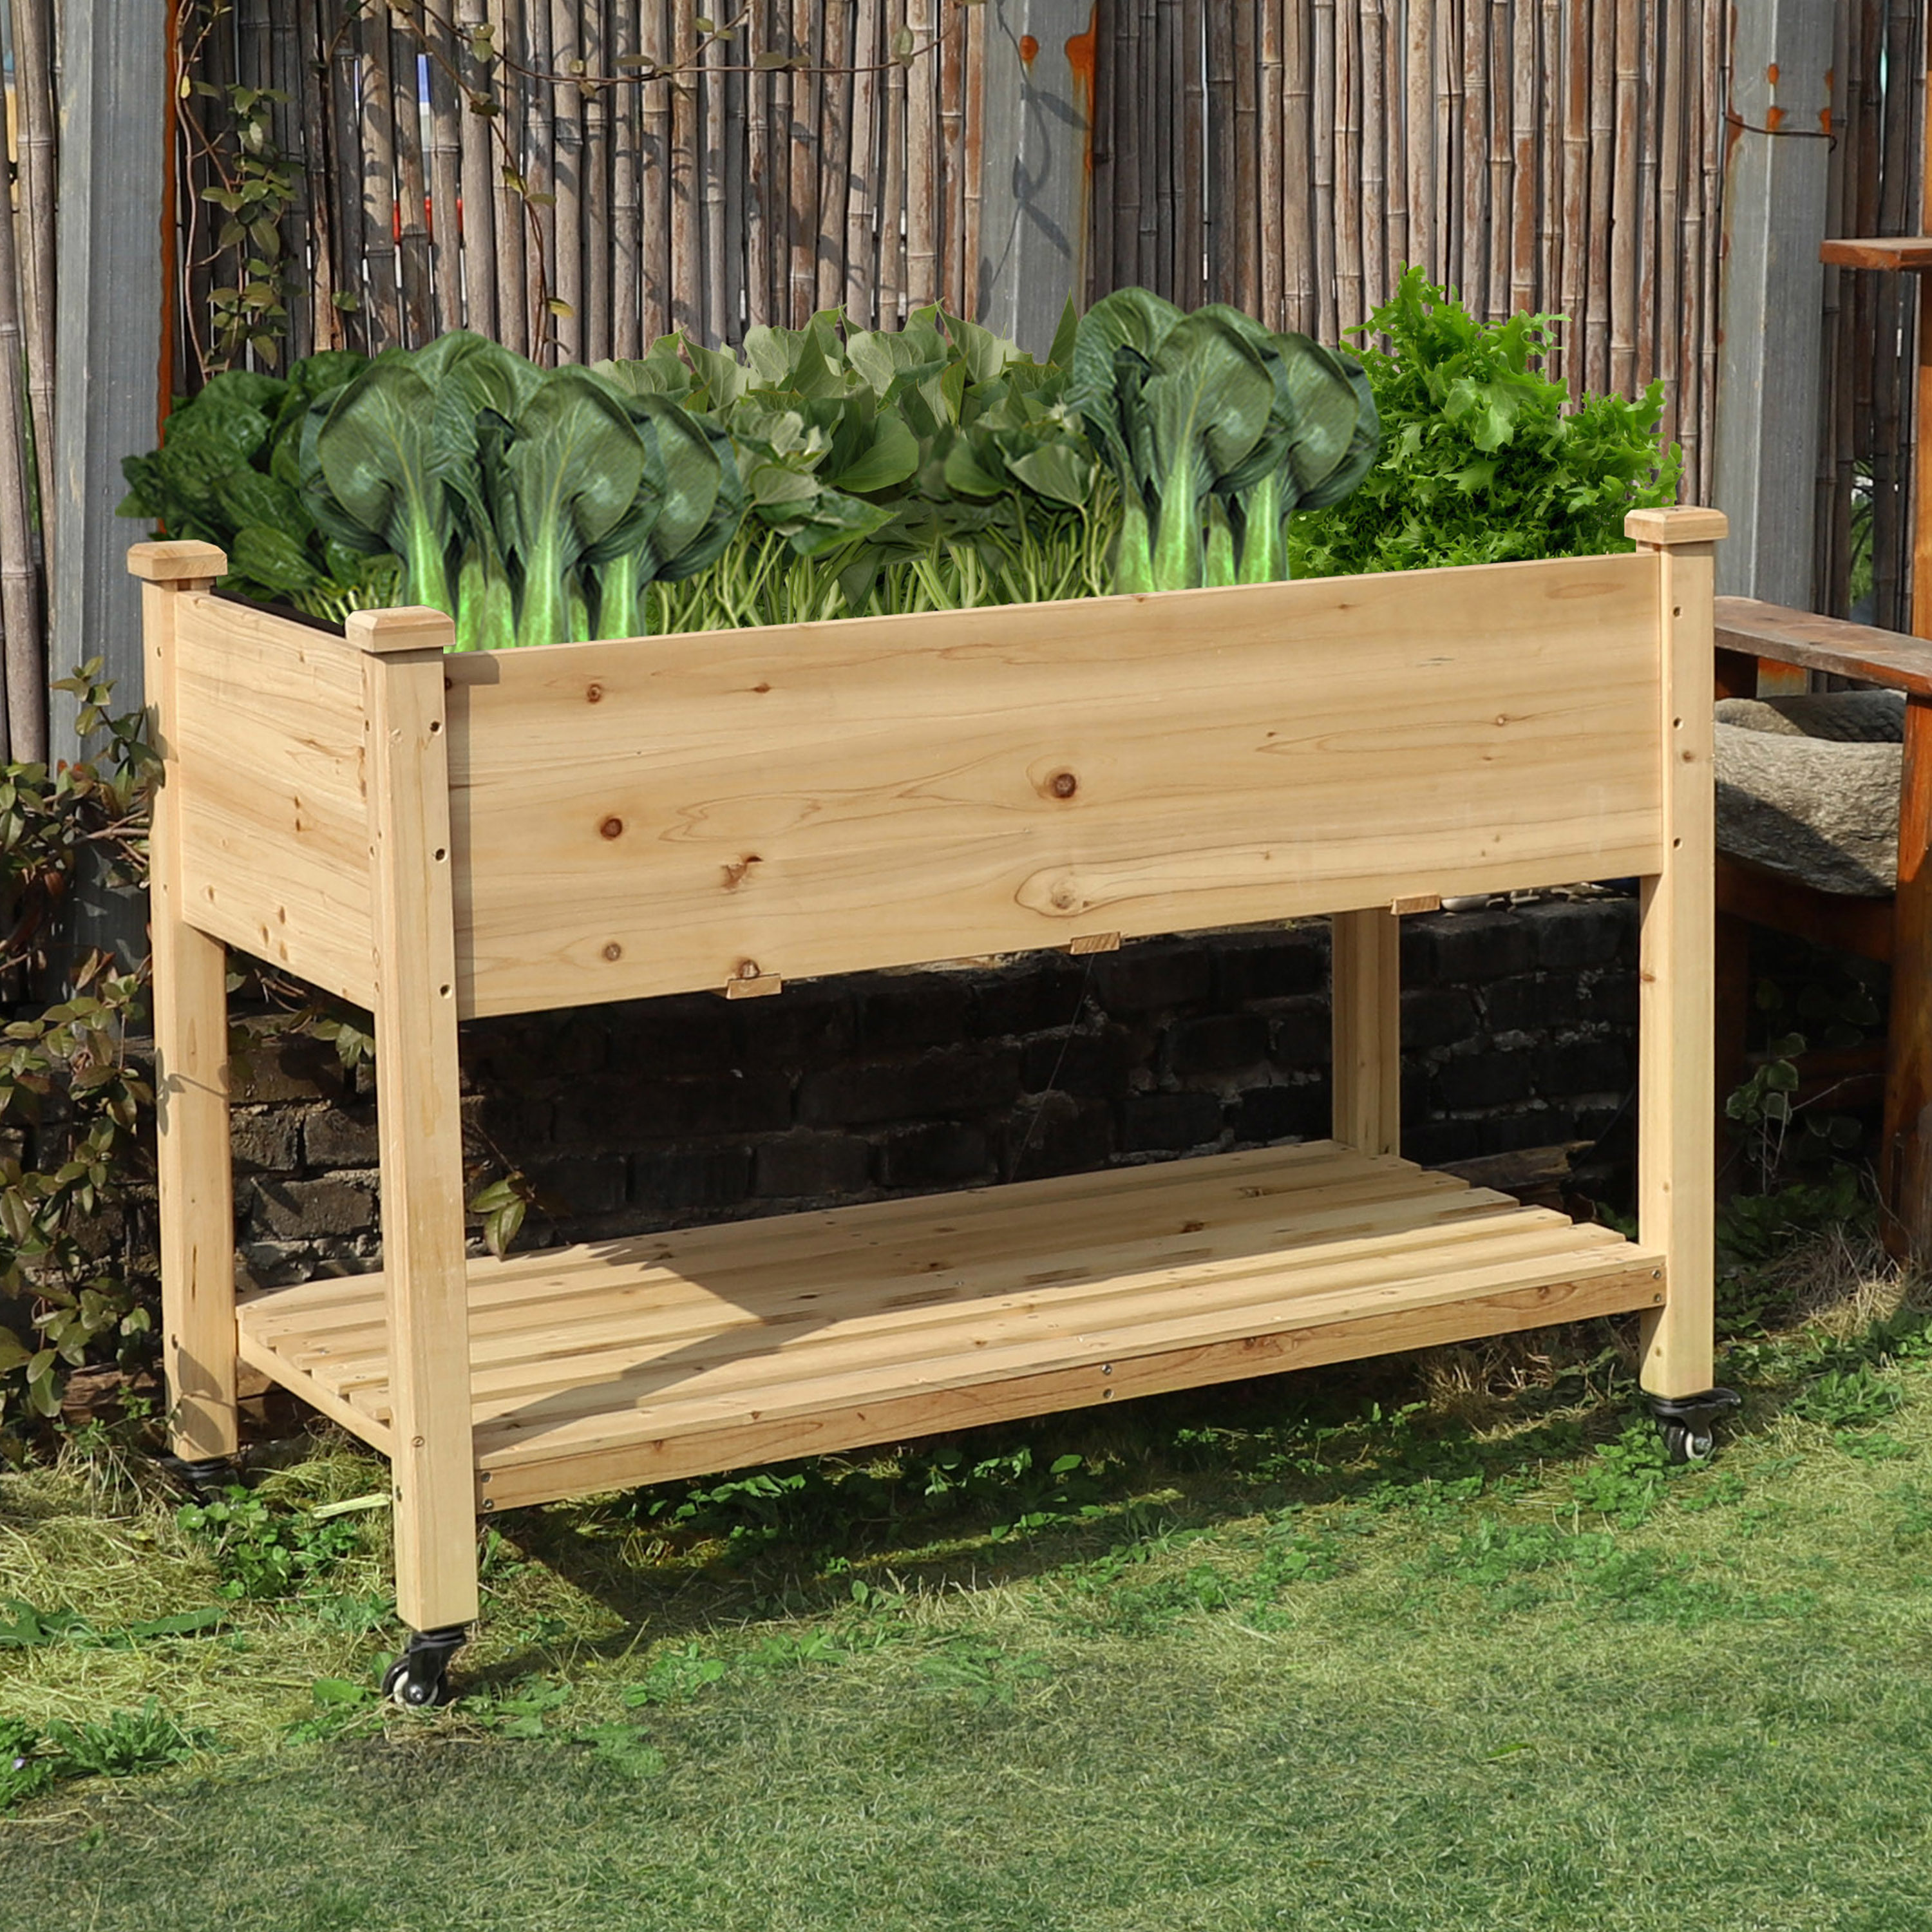 VEIKOUS Raised Garden Bed Planter Box 23-in W x 47-in L x 33-in H with Four Wheels and Legs the Raised Garden department at Lowes.com